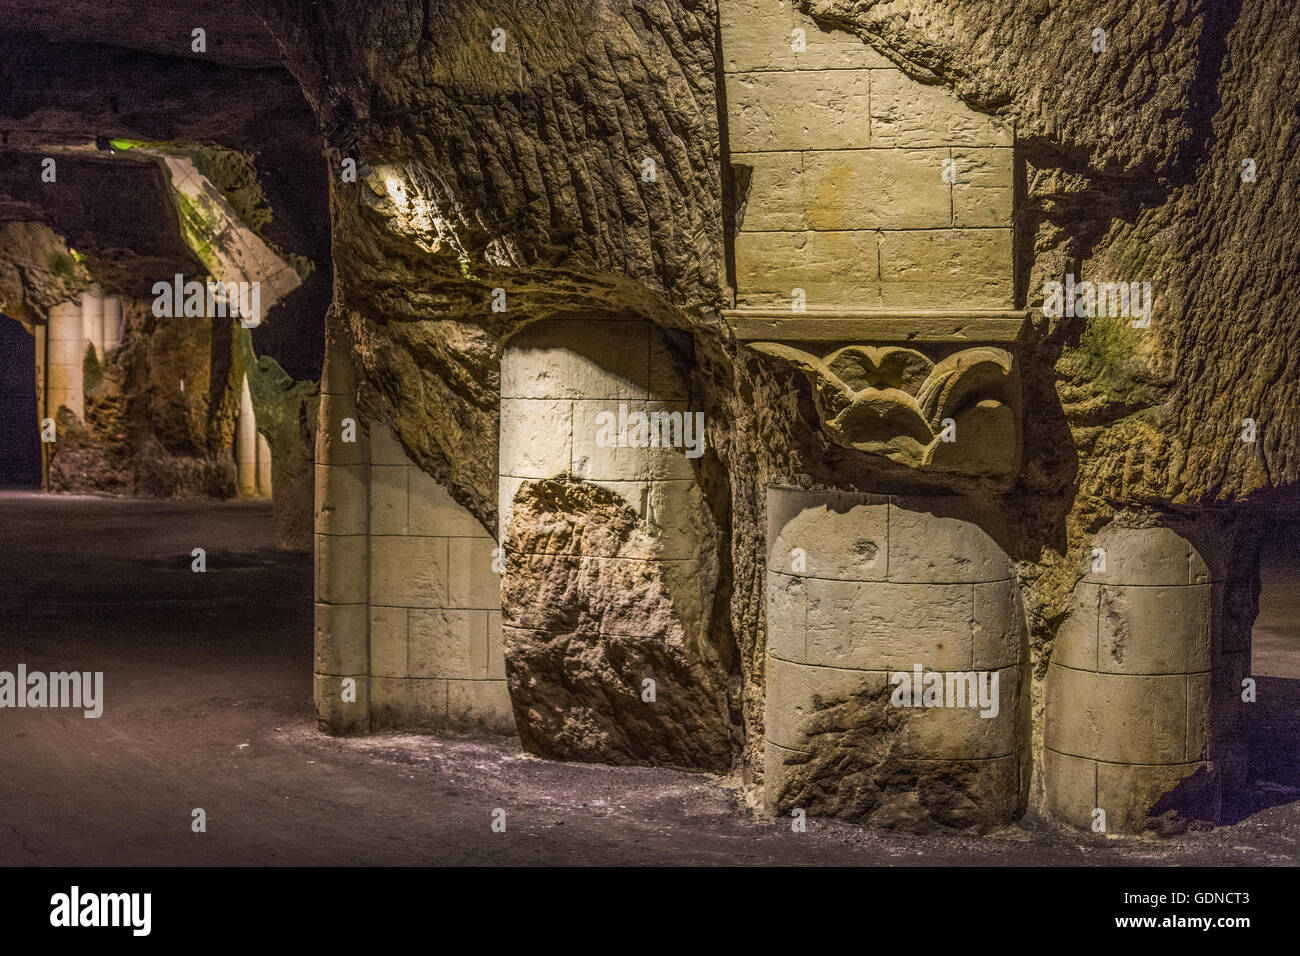 old wine cellars in caves with scultures of artiste Philippe Cormand, Bouvet-Ladubay winery at Saumur, France Stock Photo